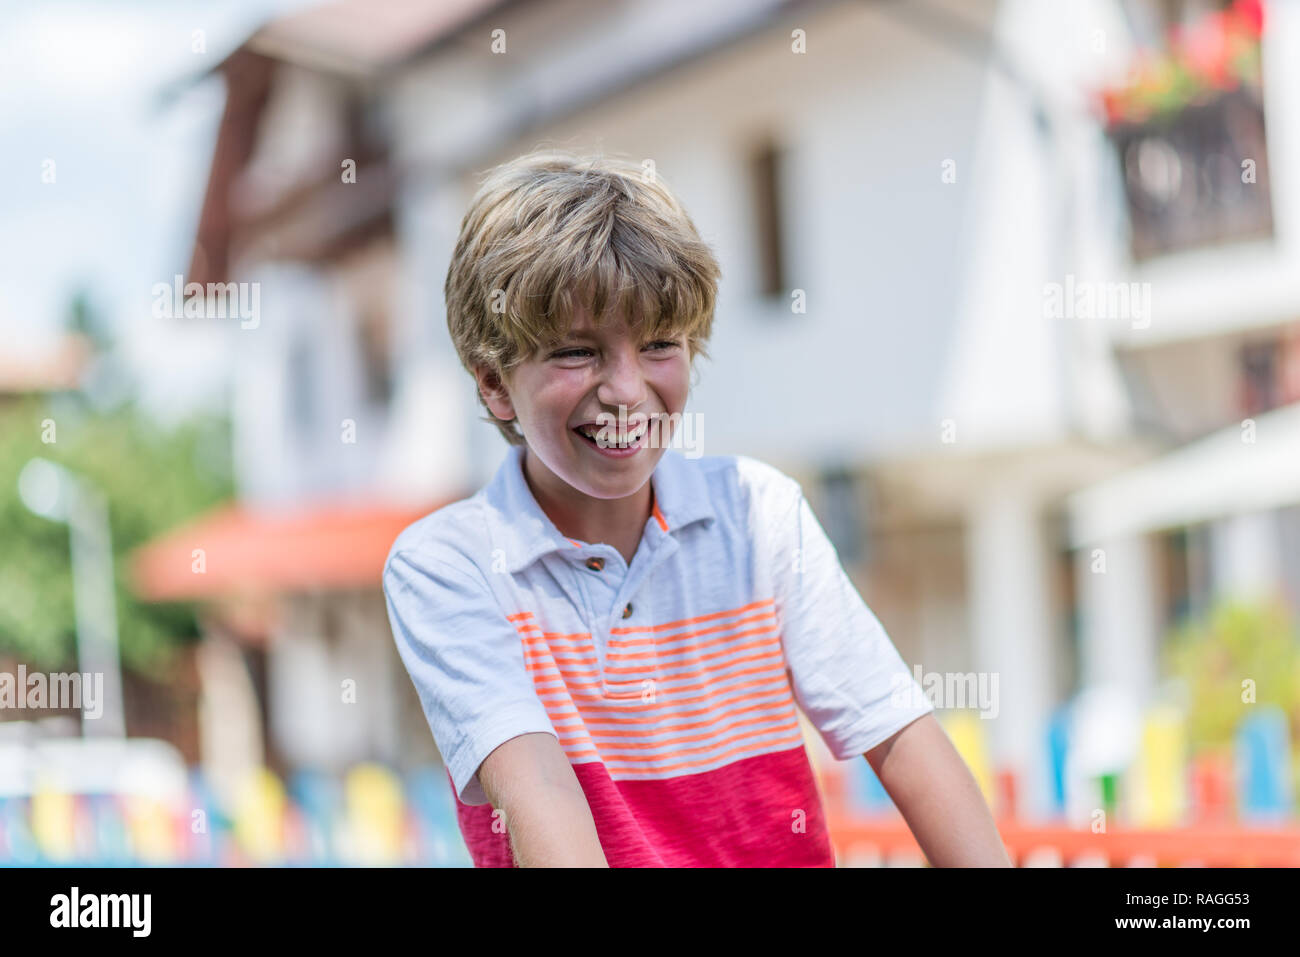 Portrait of a smiling boy with a blurred background Stock Photo